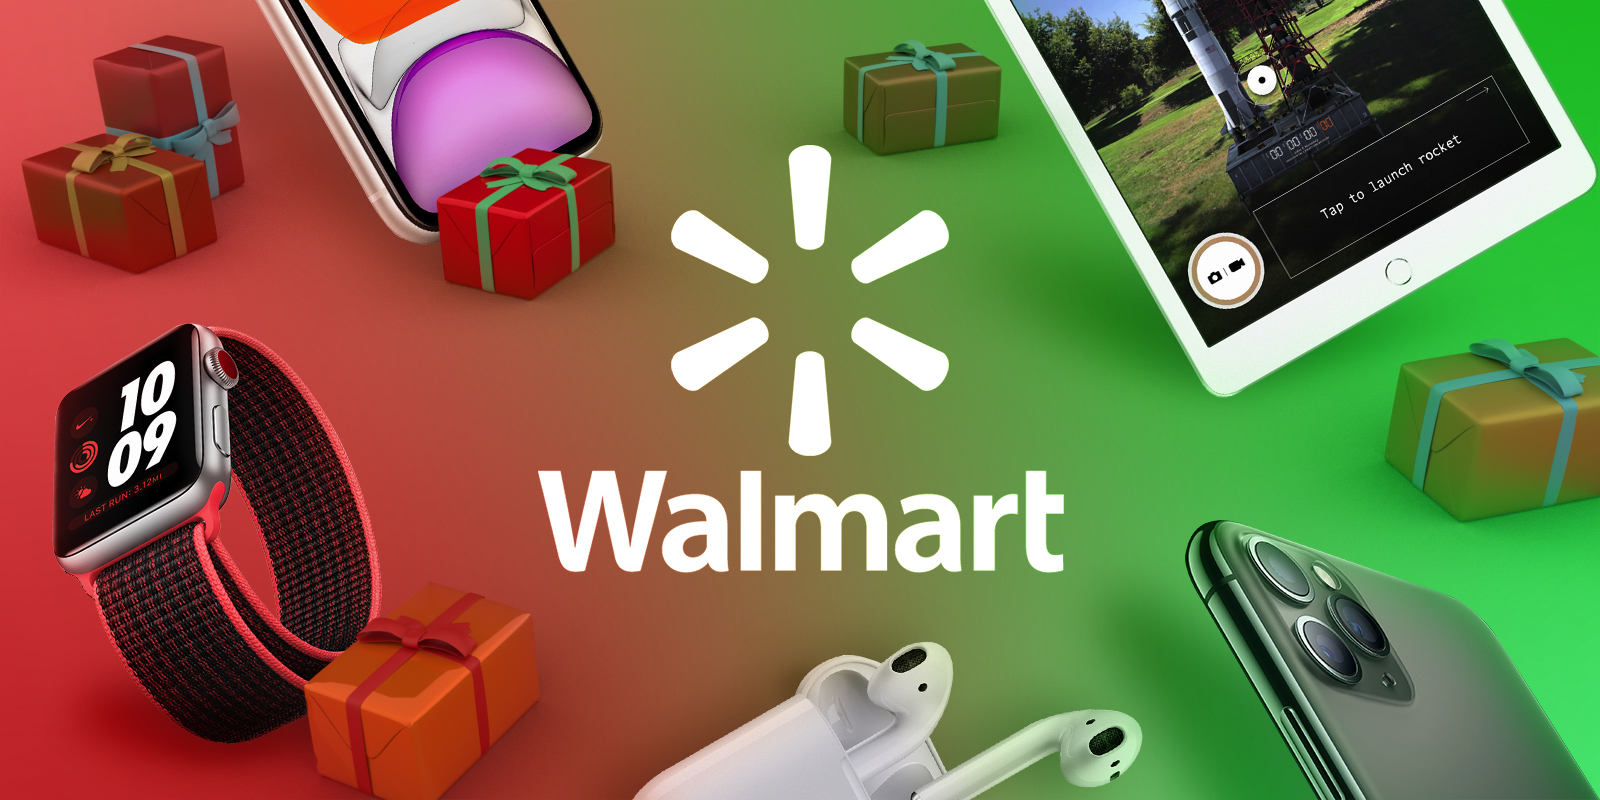 Black Friday Spotlight: Walmart Will Offer Competitive Prices on AirPods, Apple Watch Series 3, and 10.2-Inch iPad